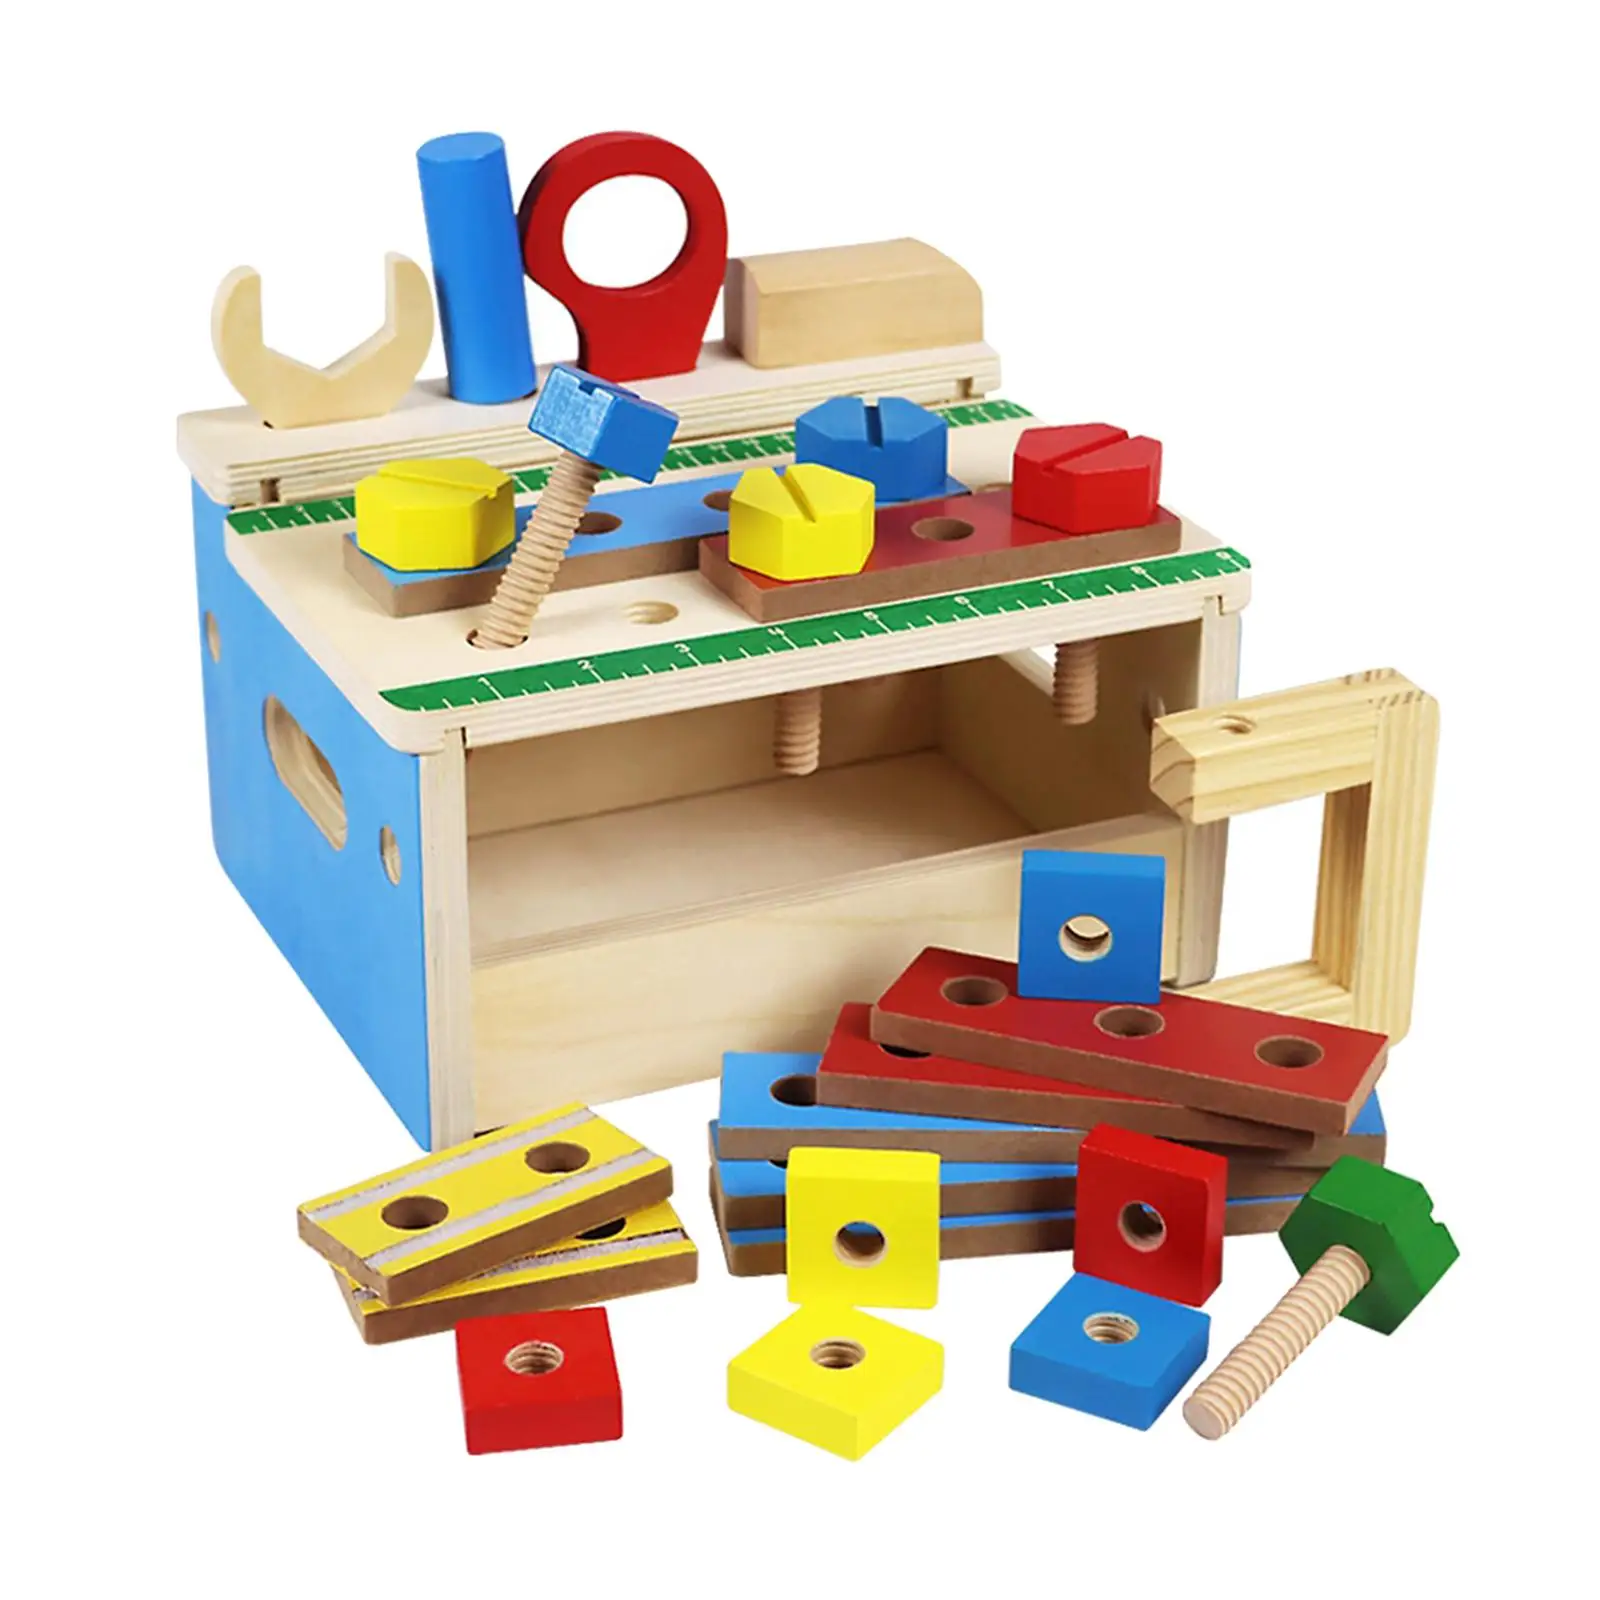 27 Pieces Tool Kit Toy Preschool Learning Activities Toy Wooden Construction Toy for Children Kids